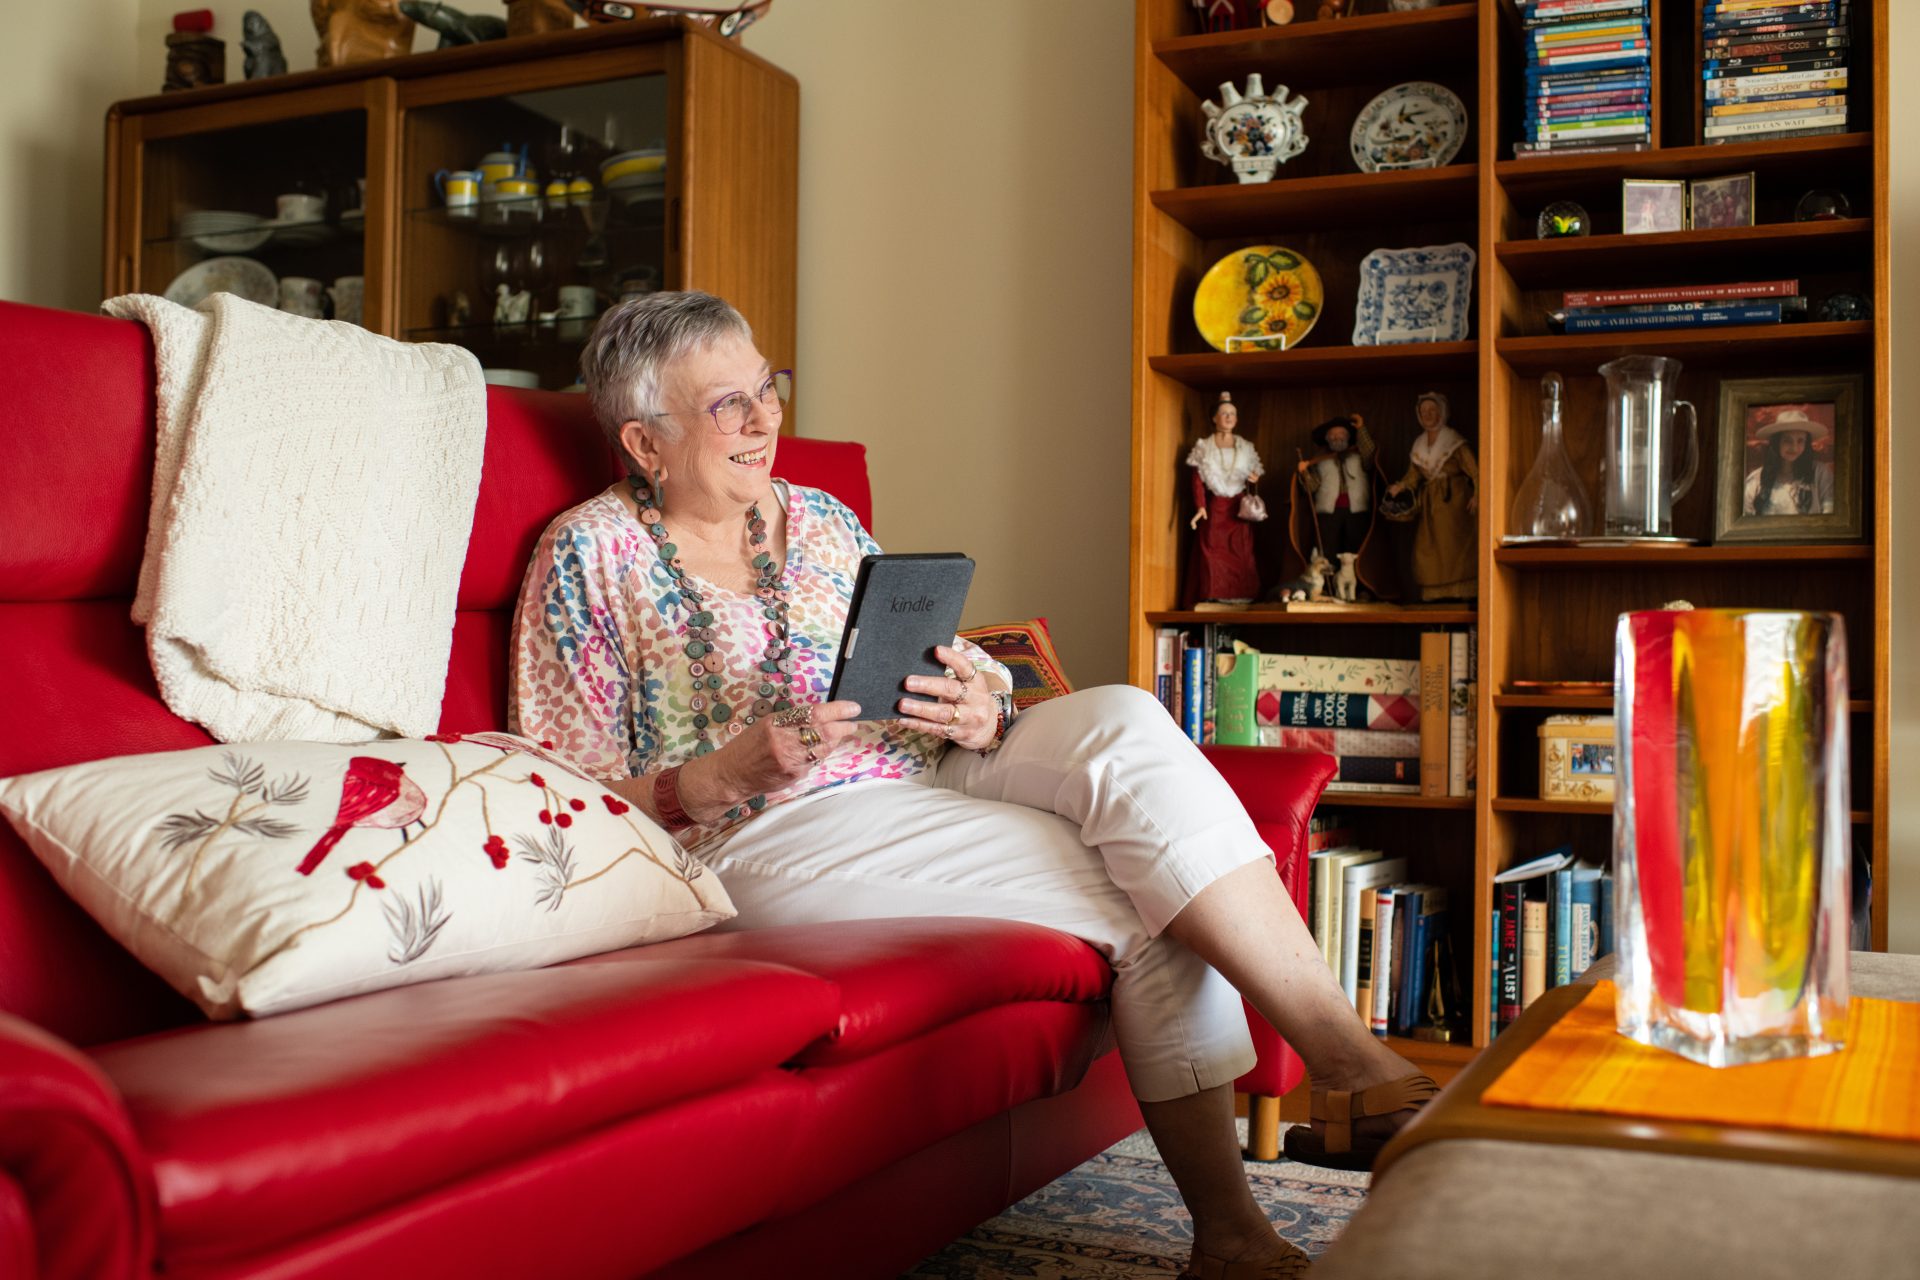 An older woman sitting on the couch reading a kindle and looking out window smiling